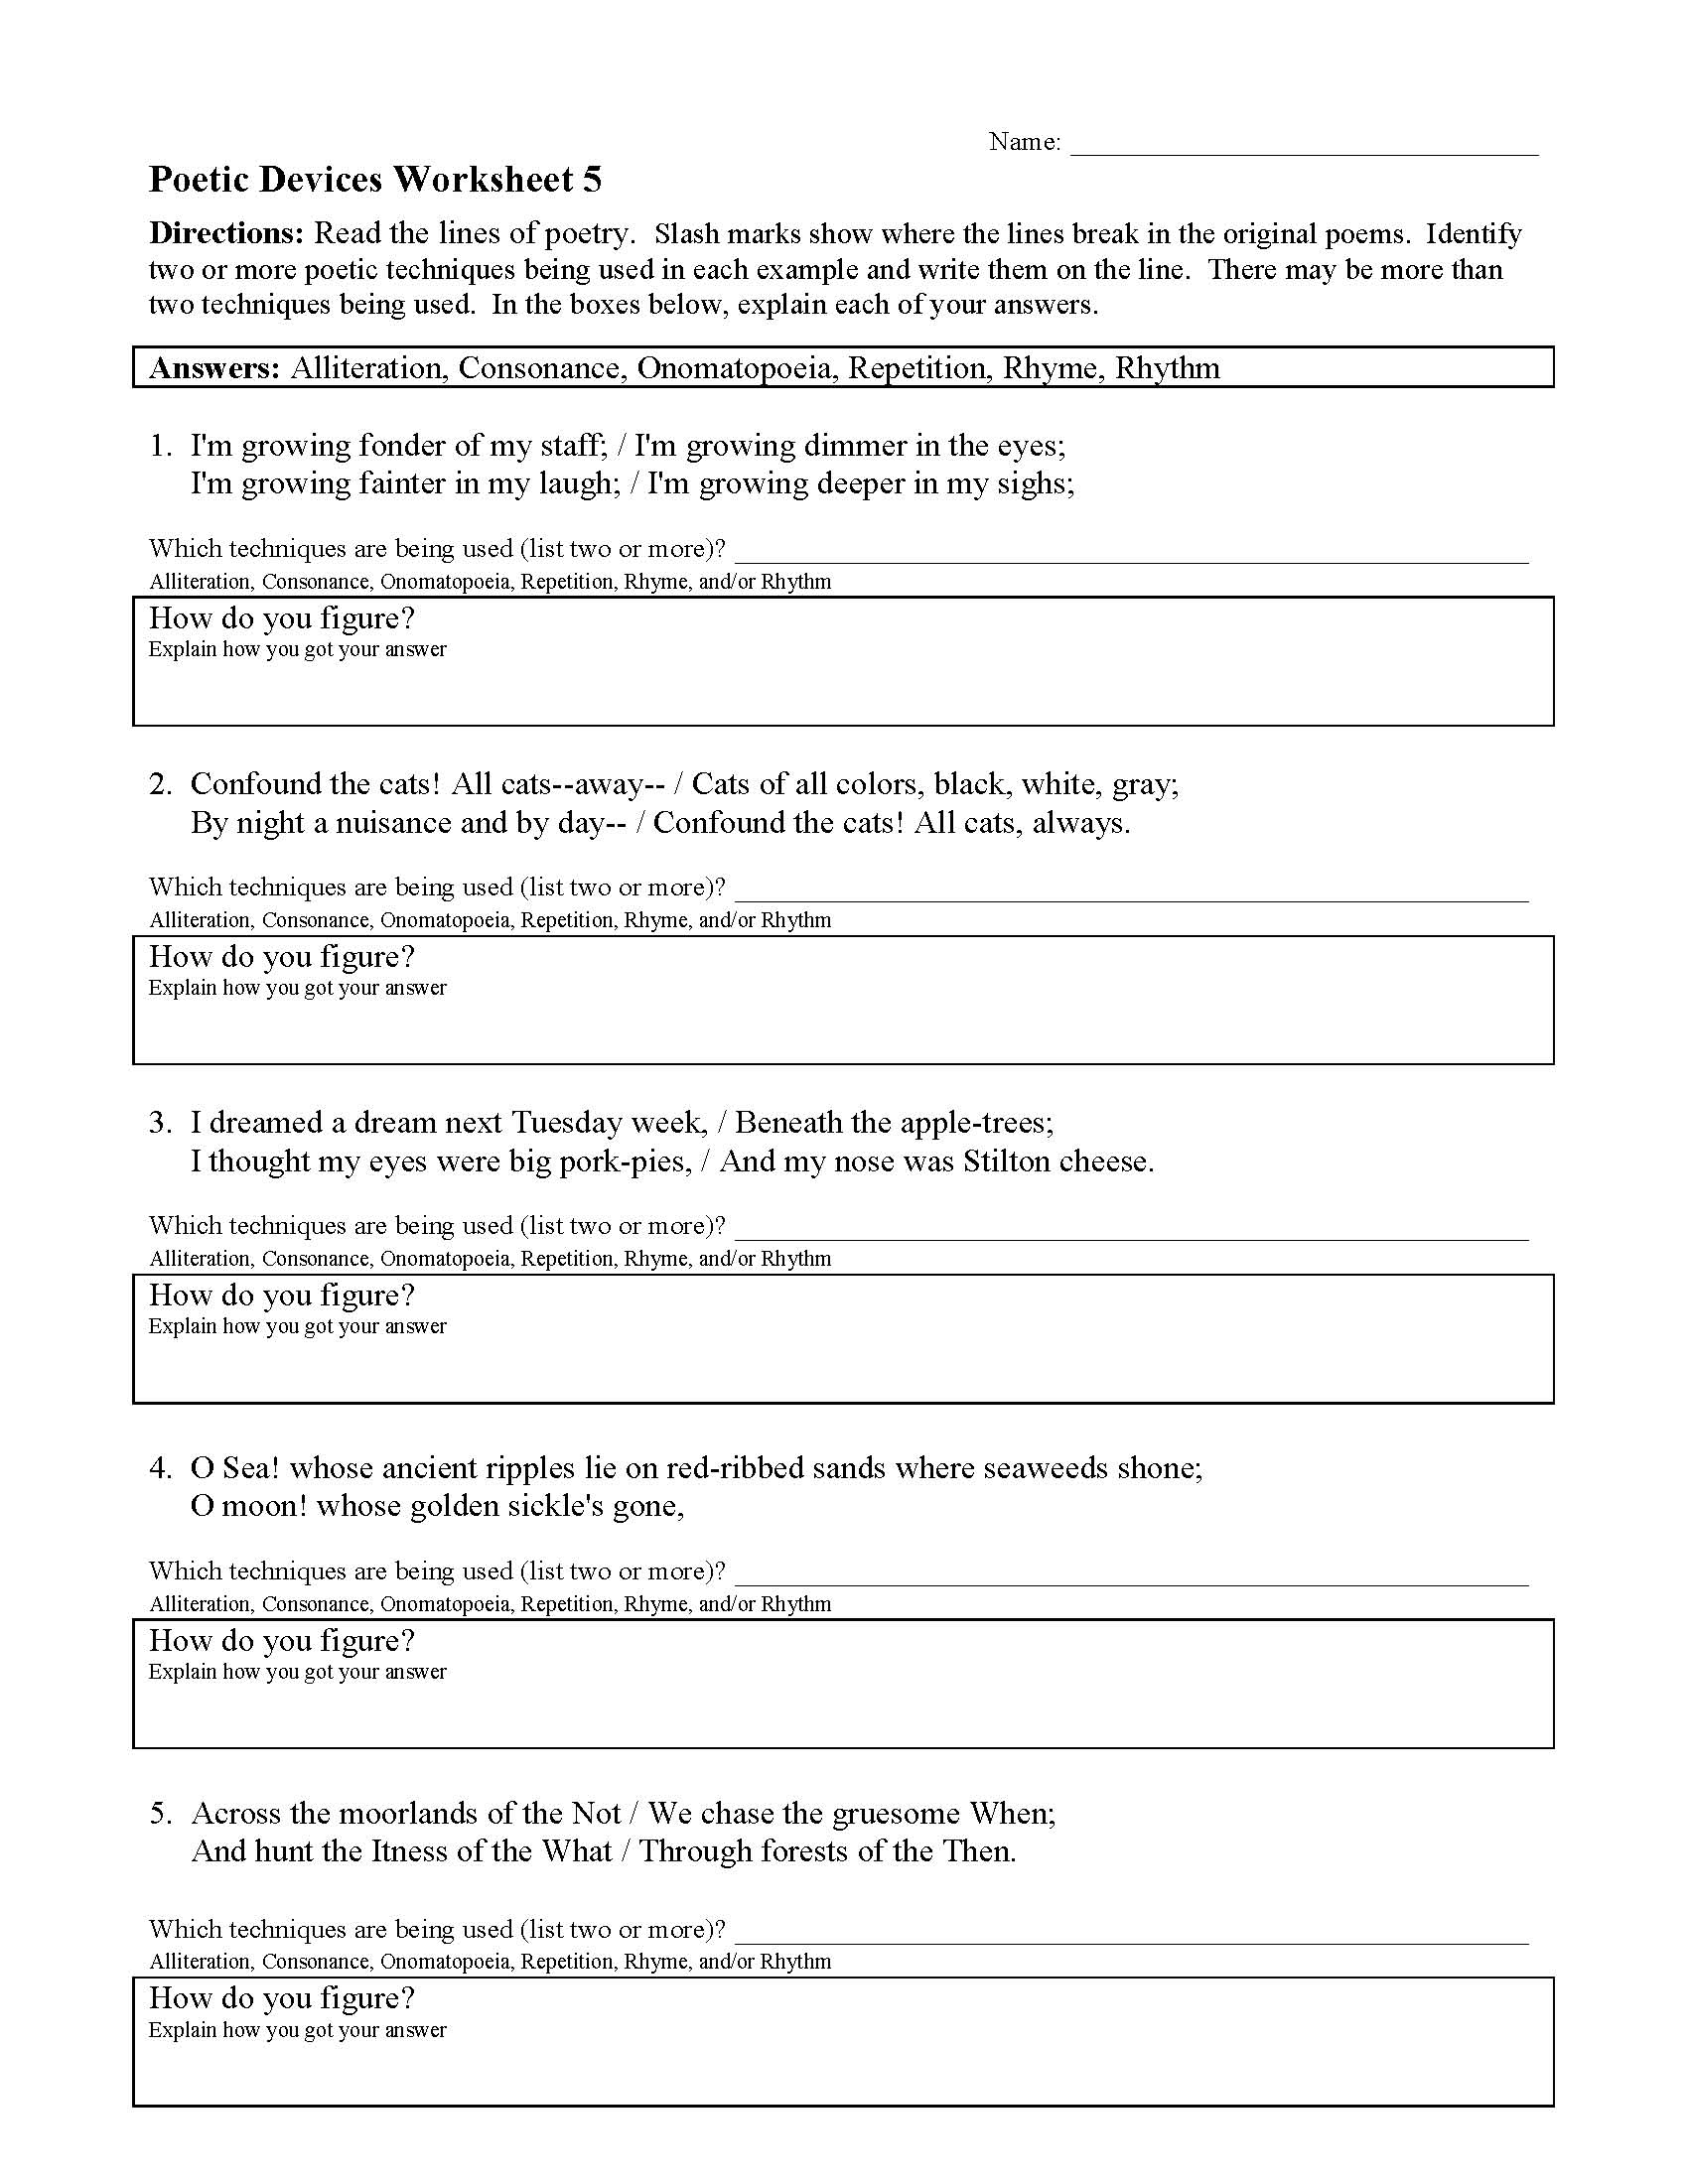 Poetic Devices Worksheets & Activities  Figurative Language In Literary Devices Worksheet Pdf